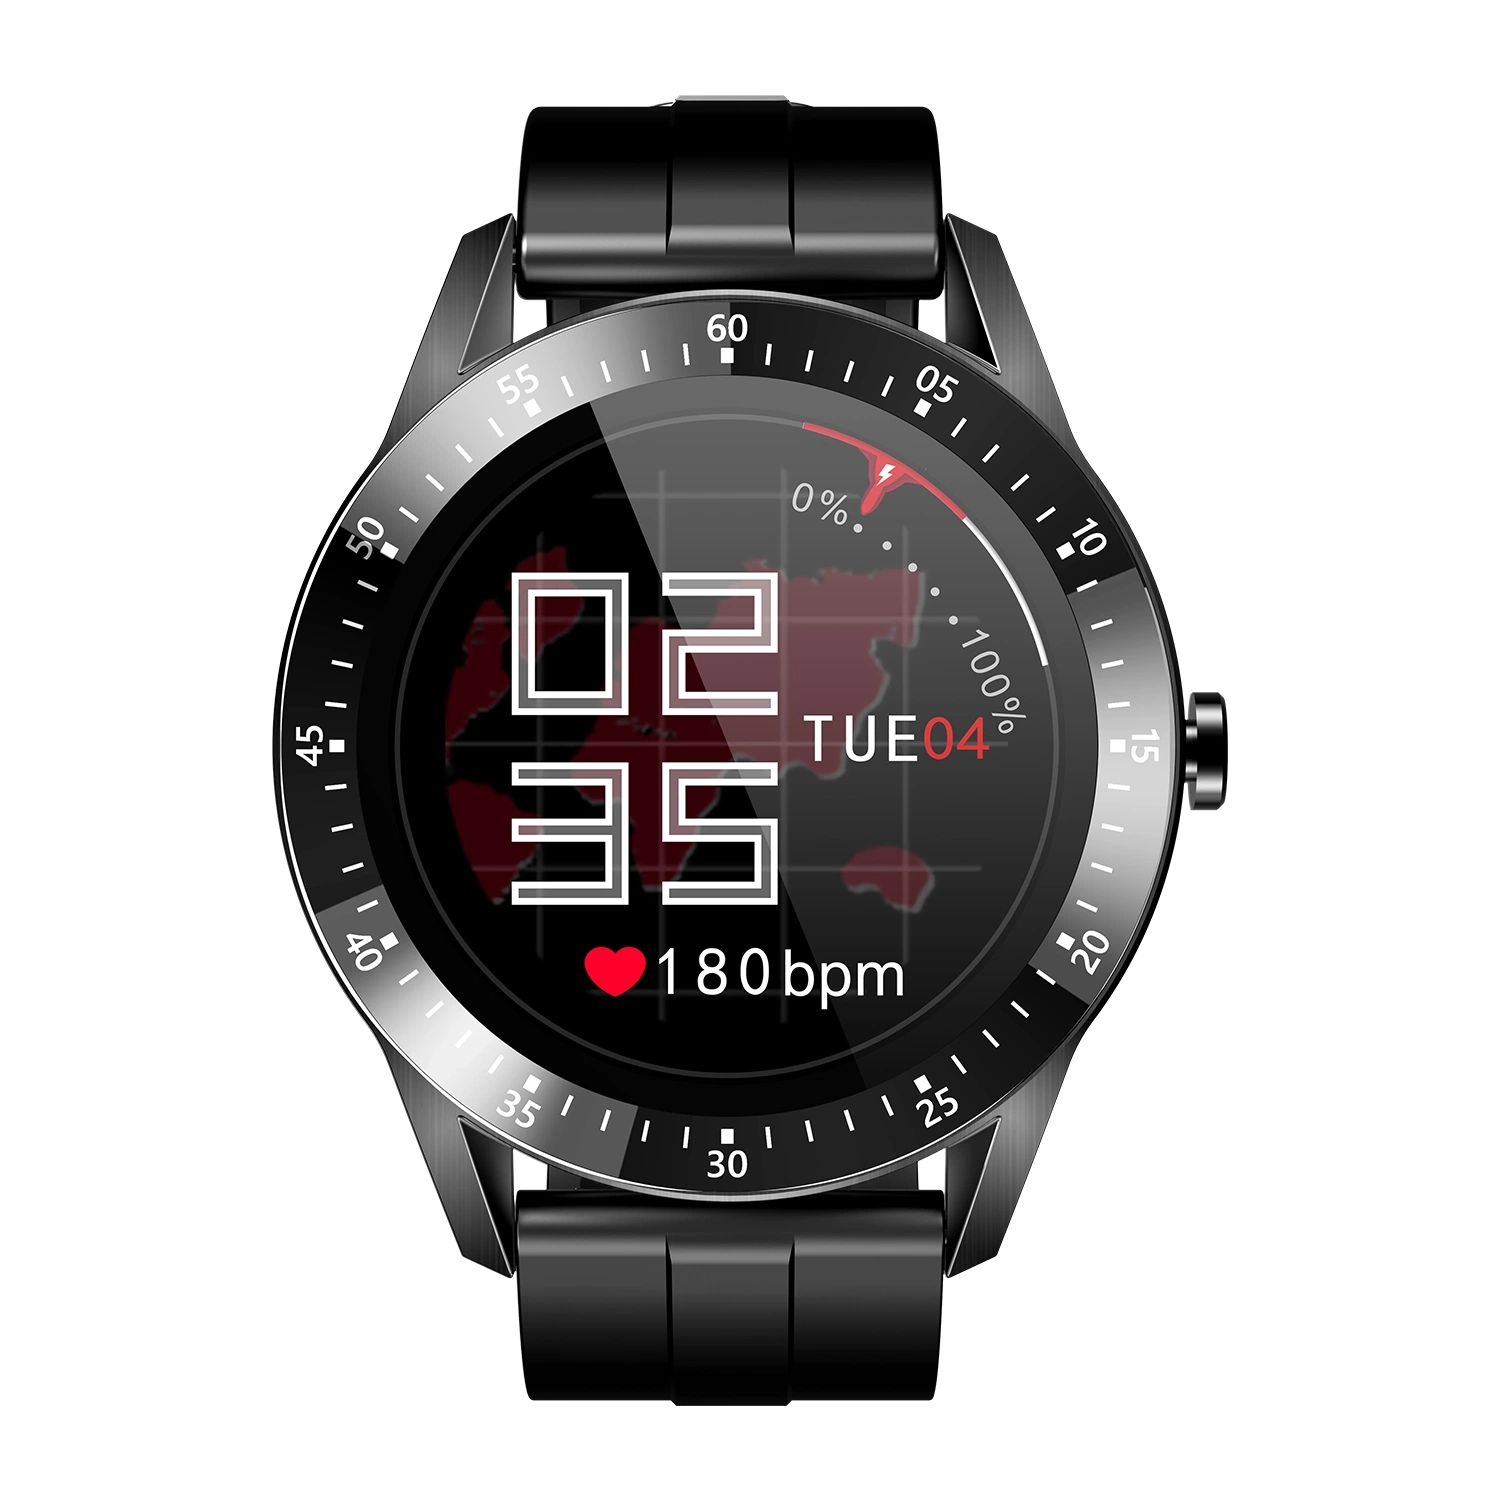 Global Hot Sale Vg17 Smart Watch, Sports Pedometer, Heart Rate and Blood Pressure Monitoring Smart Bracelet